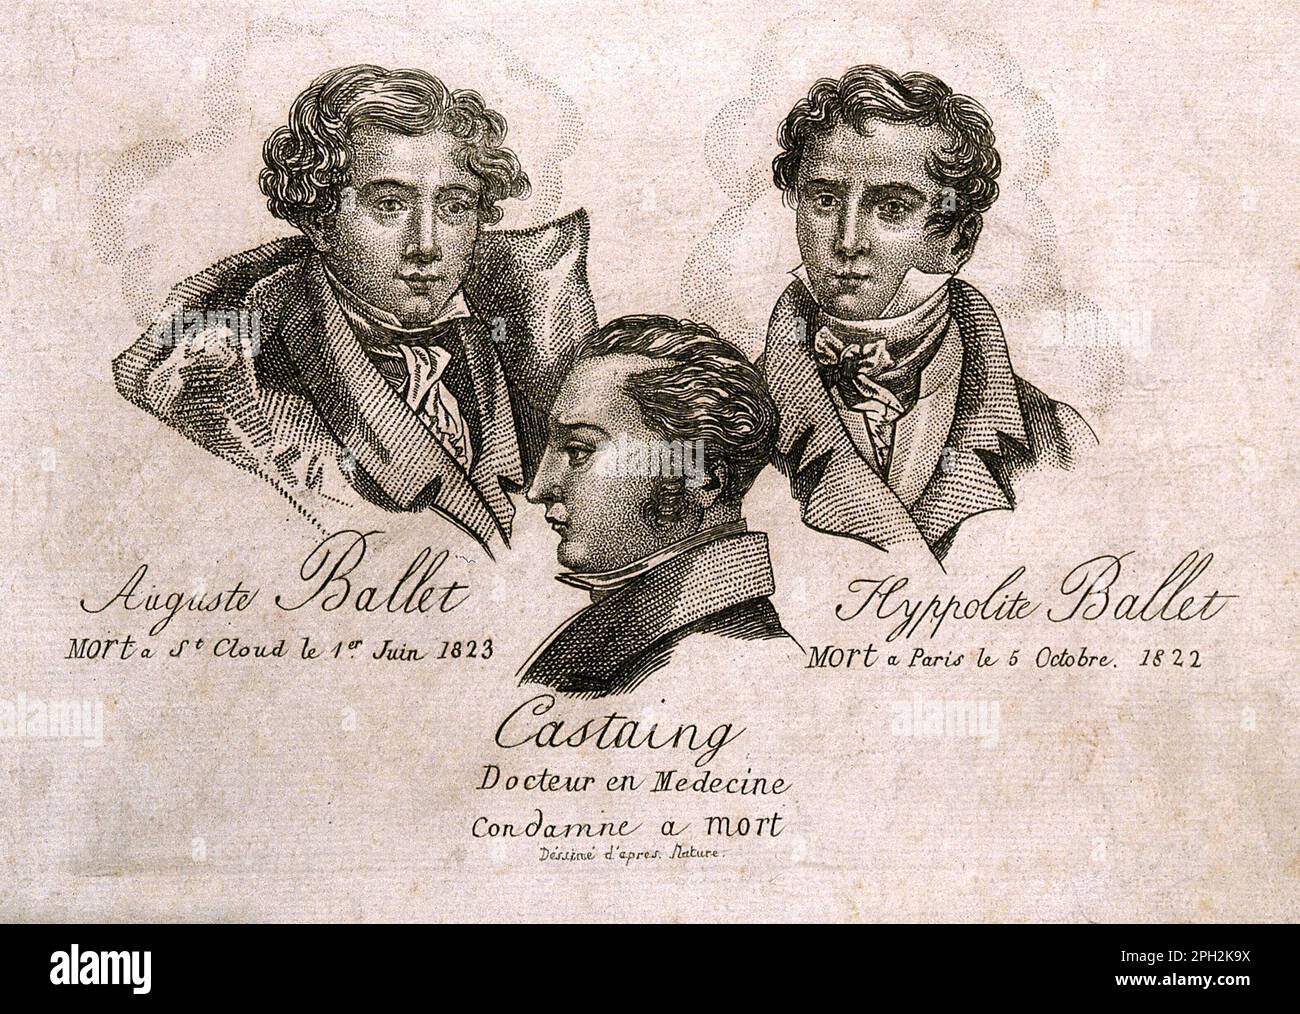 Edme-Samuel Castaing, 1796 – 1823, was a French physician and is thought to have been the first person to use morphine to commit murder of two brothers Hyppolite Ballet and Auguste Ballet, vintage engraving from 1823 Stock Photo